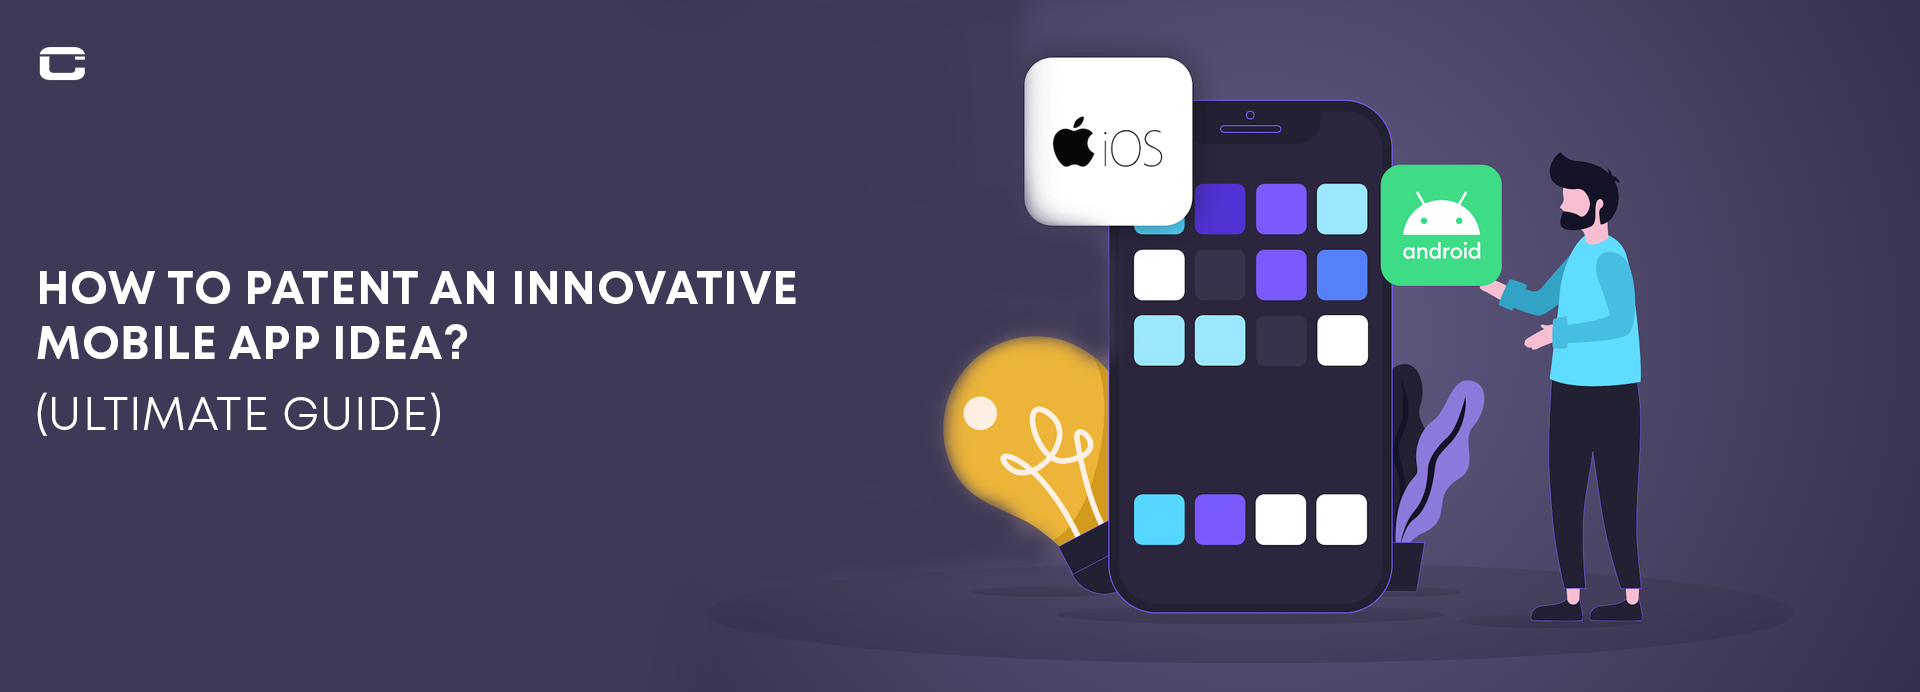 How to Patent an Innovative Mobile App Idea? (Ultimate Guide)